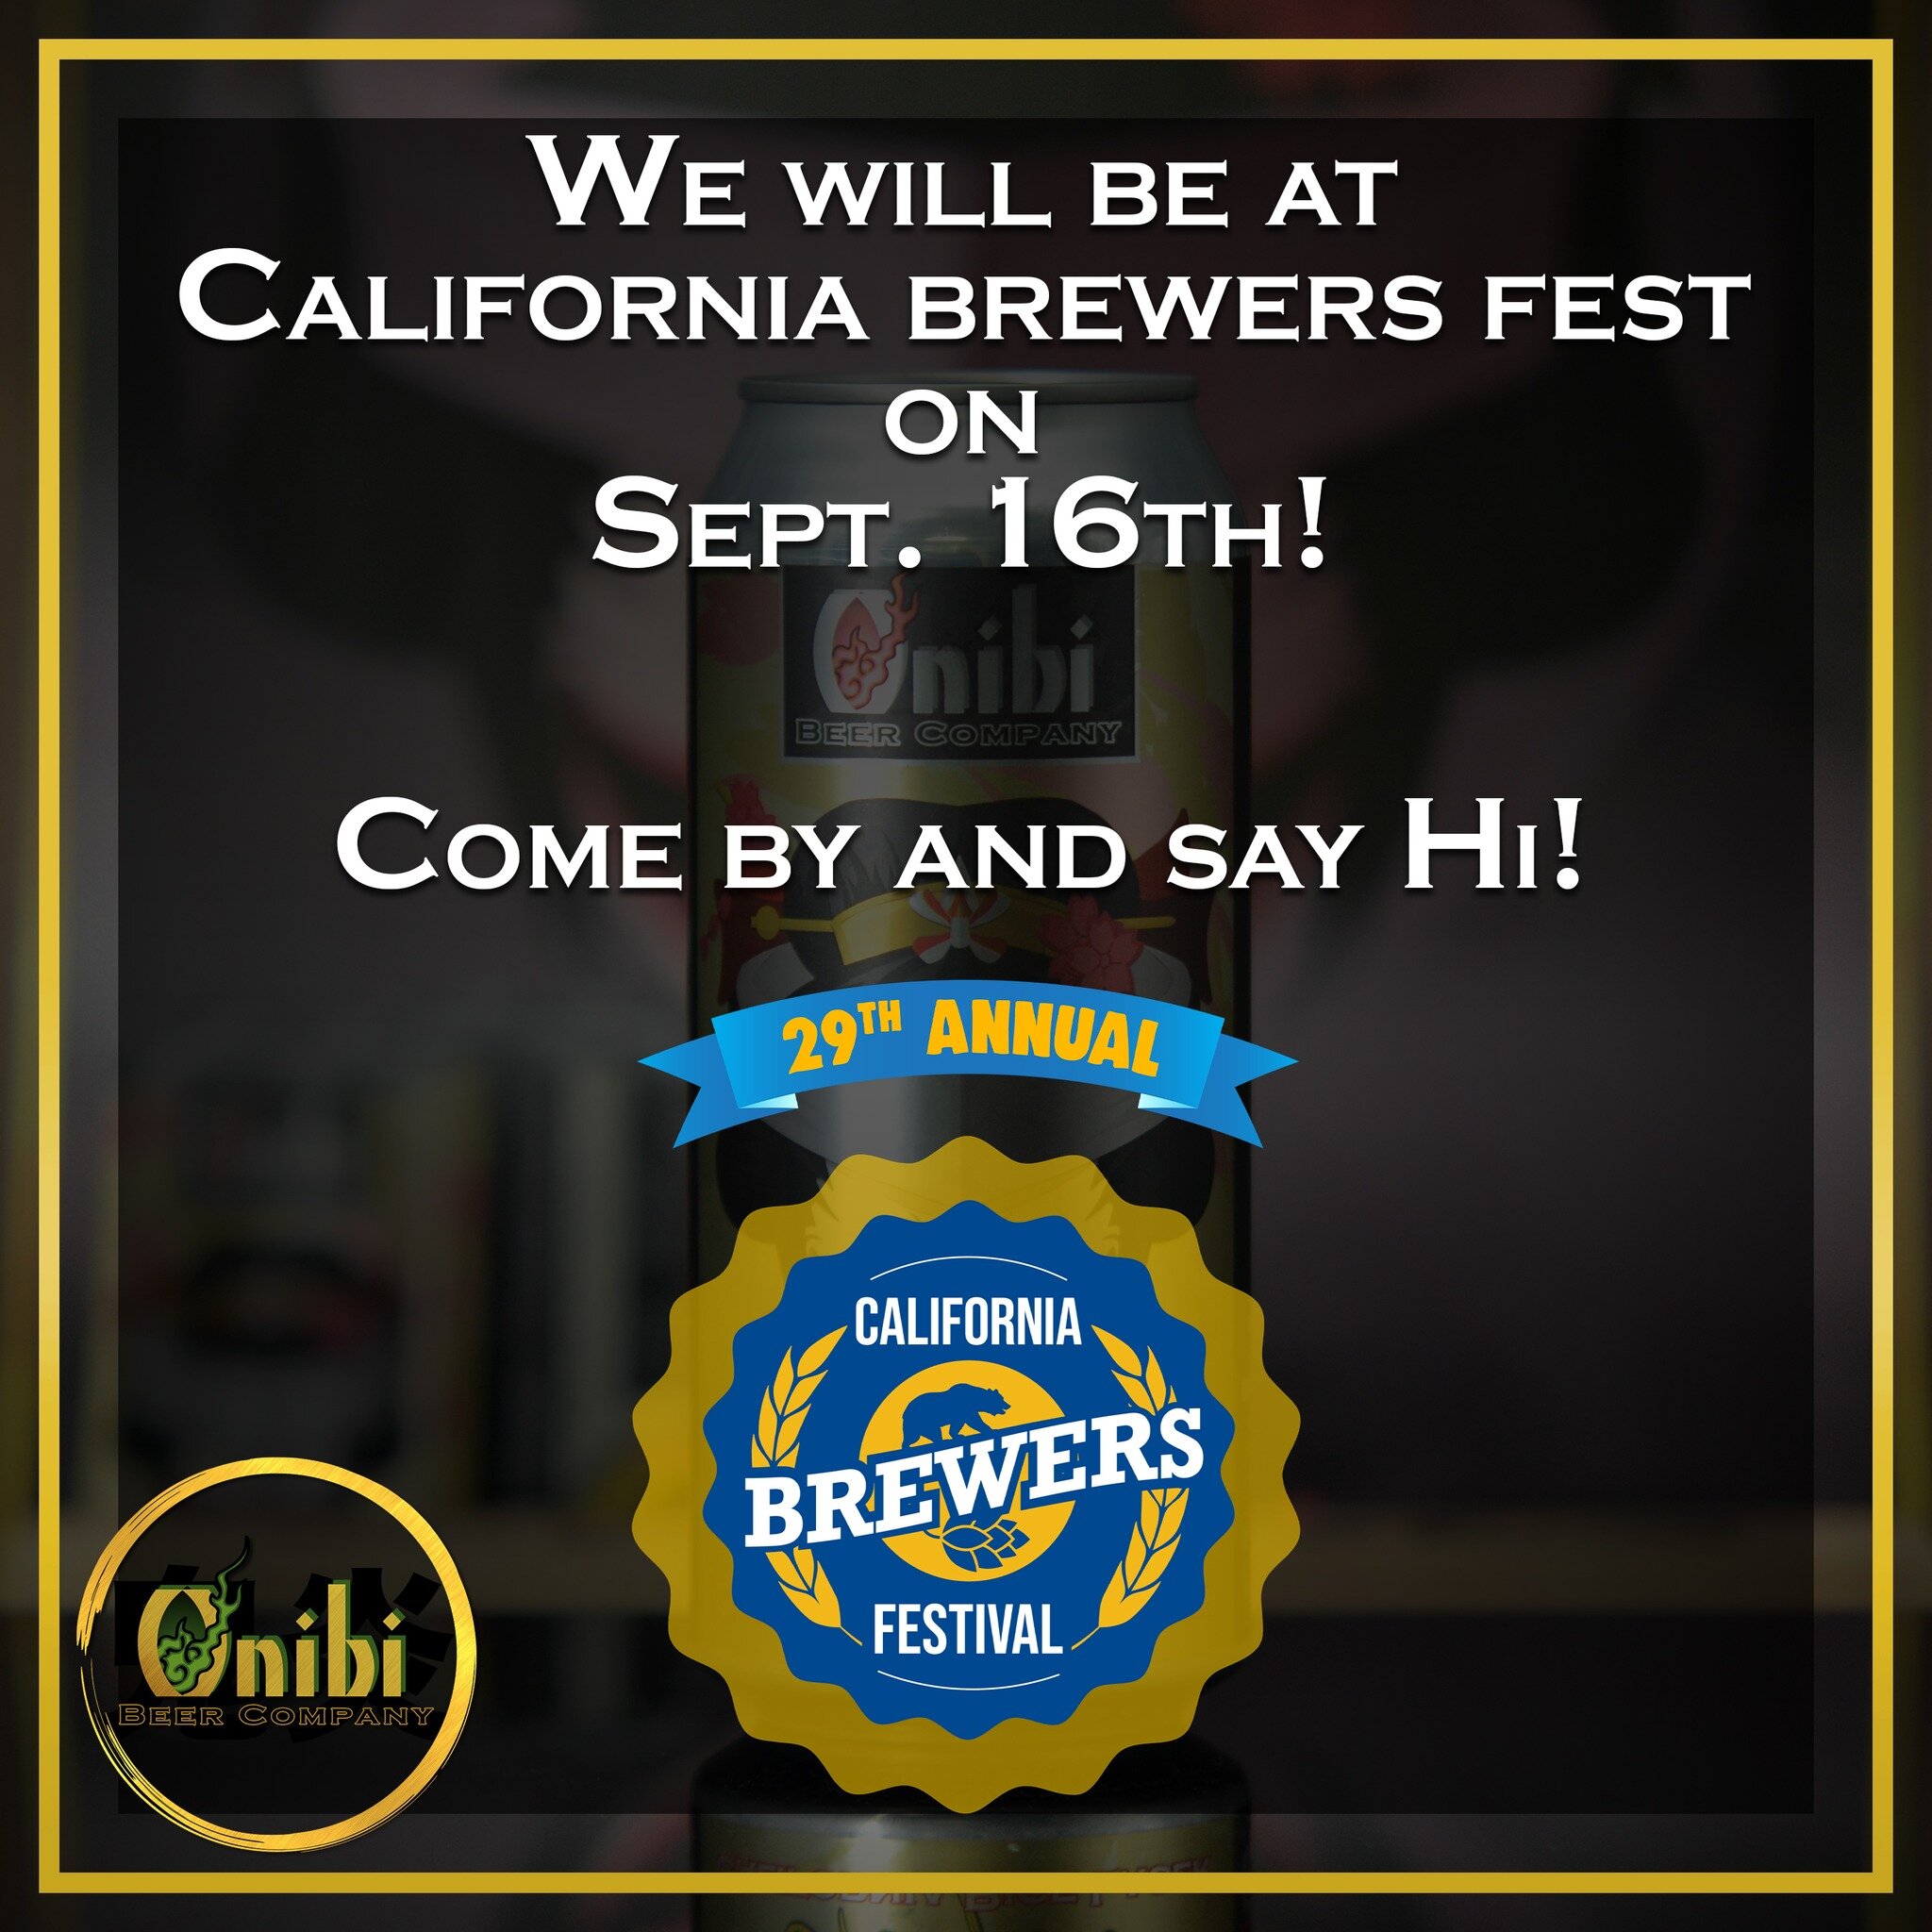 We will be at California Brewers Fest on Sept 16th!  Come by and say hi! Cheers! 🍻@cabrewfest 
.
.
.
.
.
.
.
.
#onibibeer #beer #drinklocal #craftbeer #sacramento #microbrew #onibi #westsacramento #cabrewfest